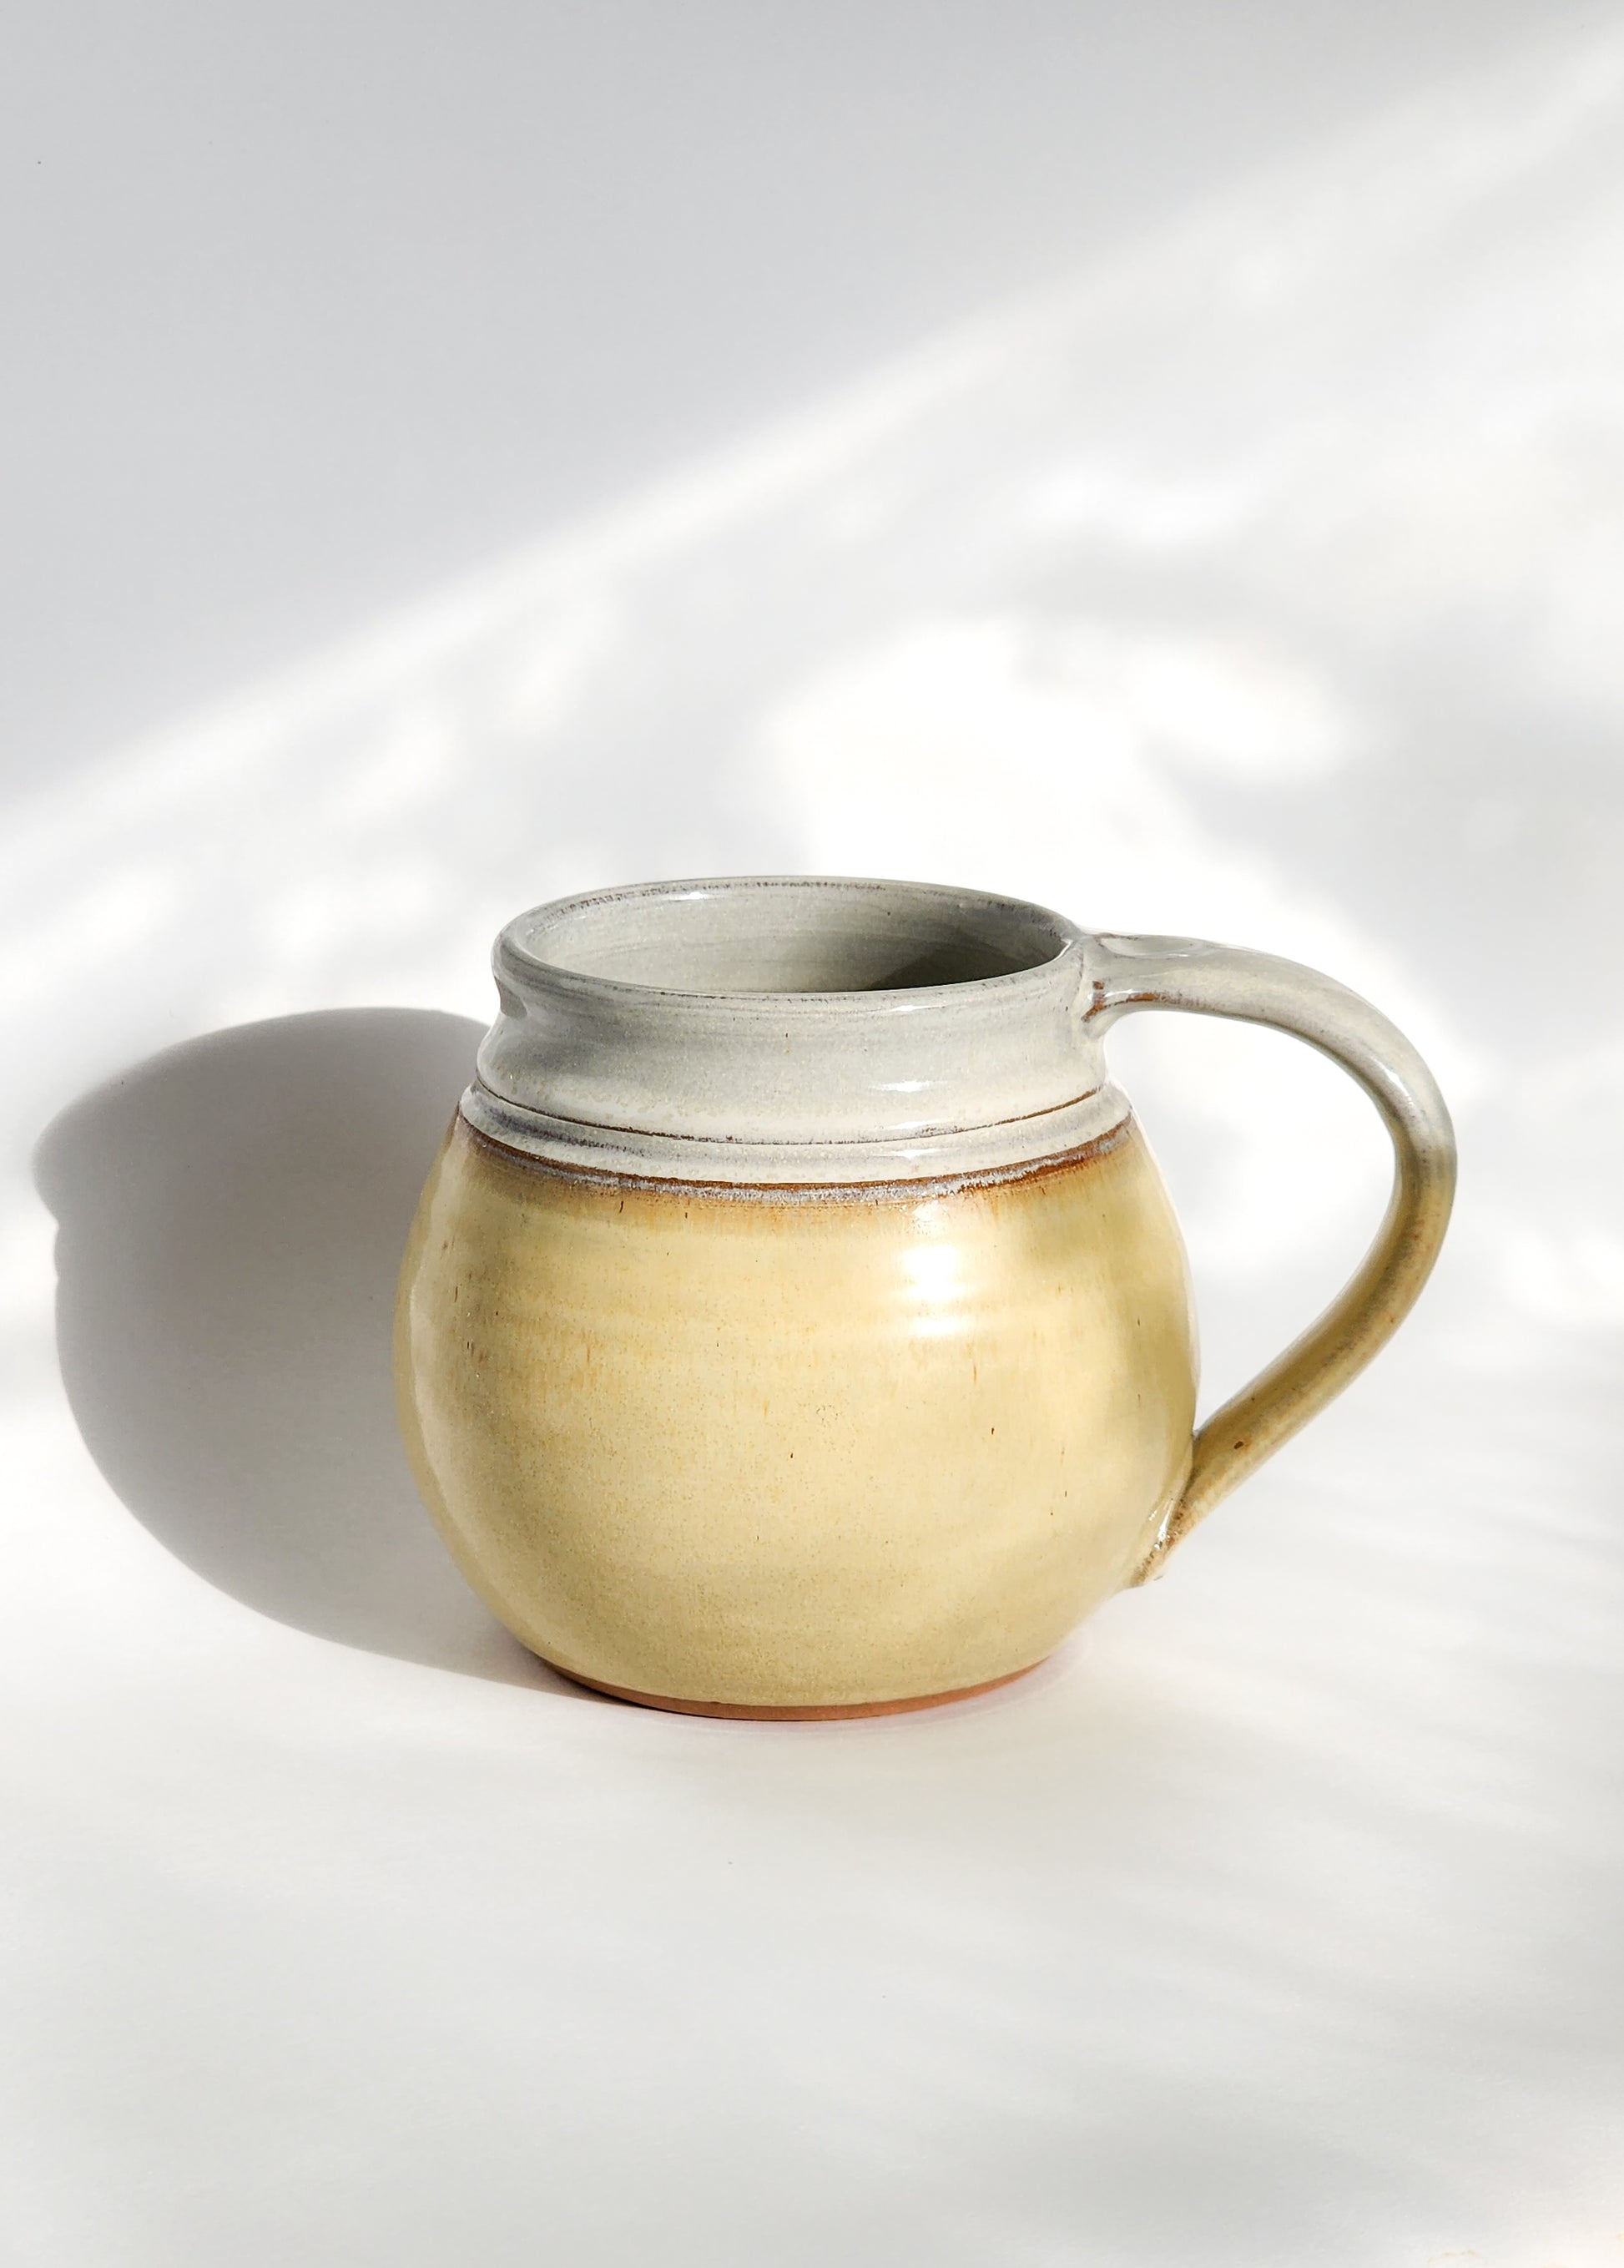  Image: Clinton Pottery's Handmade Medium Mug in Butter Yellow – A cheerful and versatile 14-16 oz mug, expertly crafted. This Butter Yellow piece adds a touch of warmth and sunshine to your daily beverage routine, reminiscent of golden fields and happiness. Ideal for savoring moderate quantities of your favorite drinks, it seamlessly combines vibrant style with functionality. The soft yellow hue enhances the cheerful appeal of this medium-sized mug. 